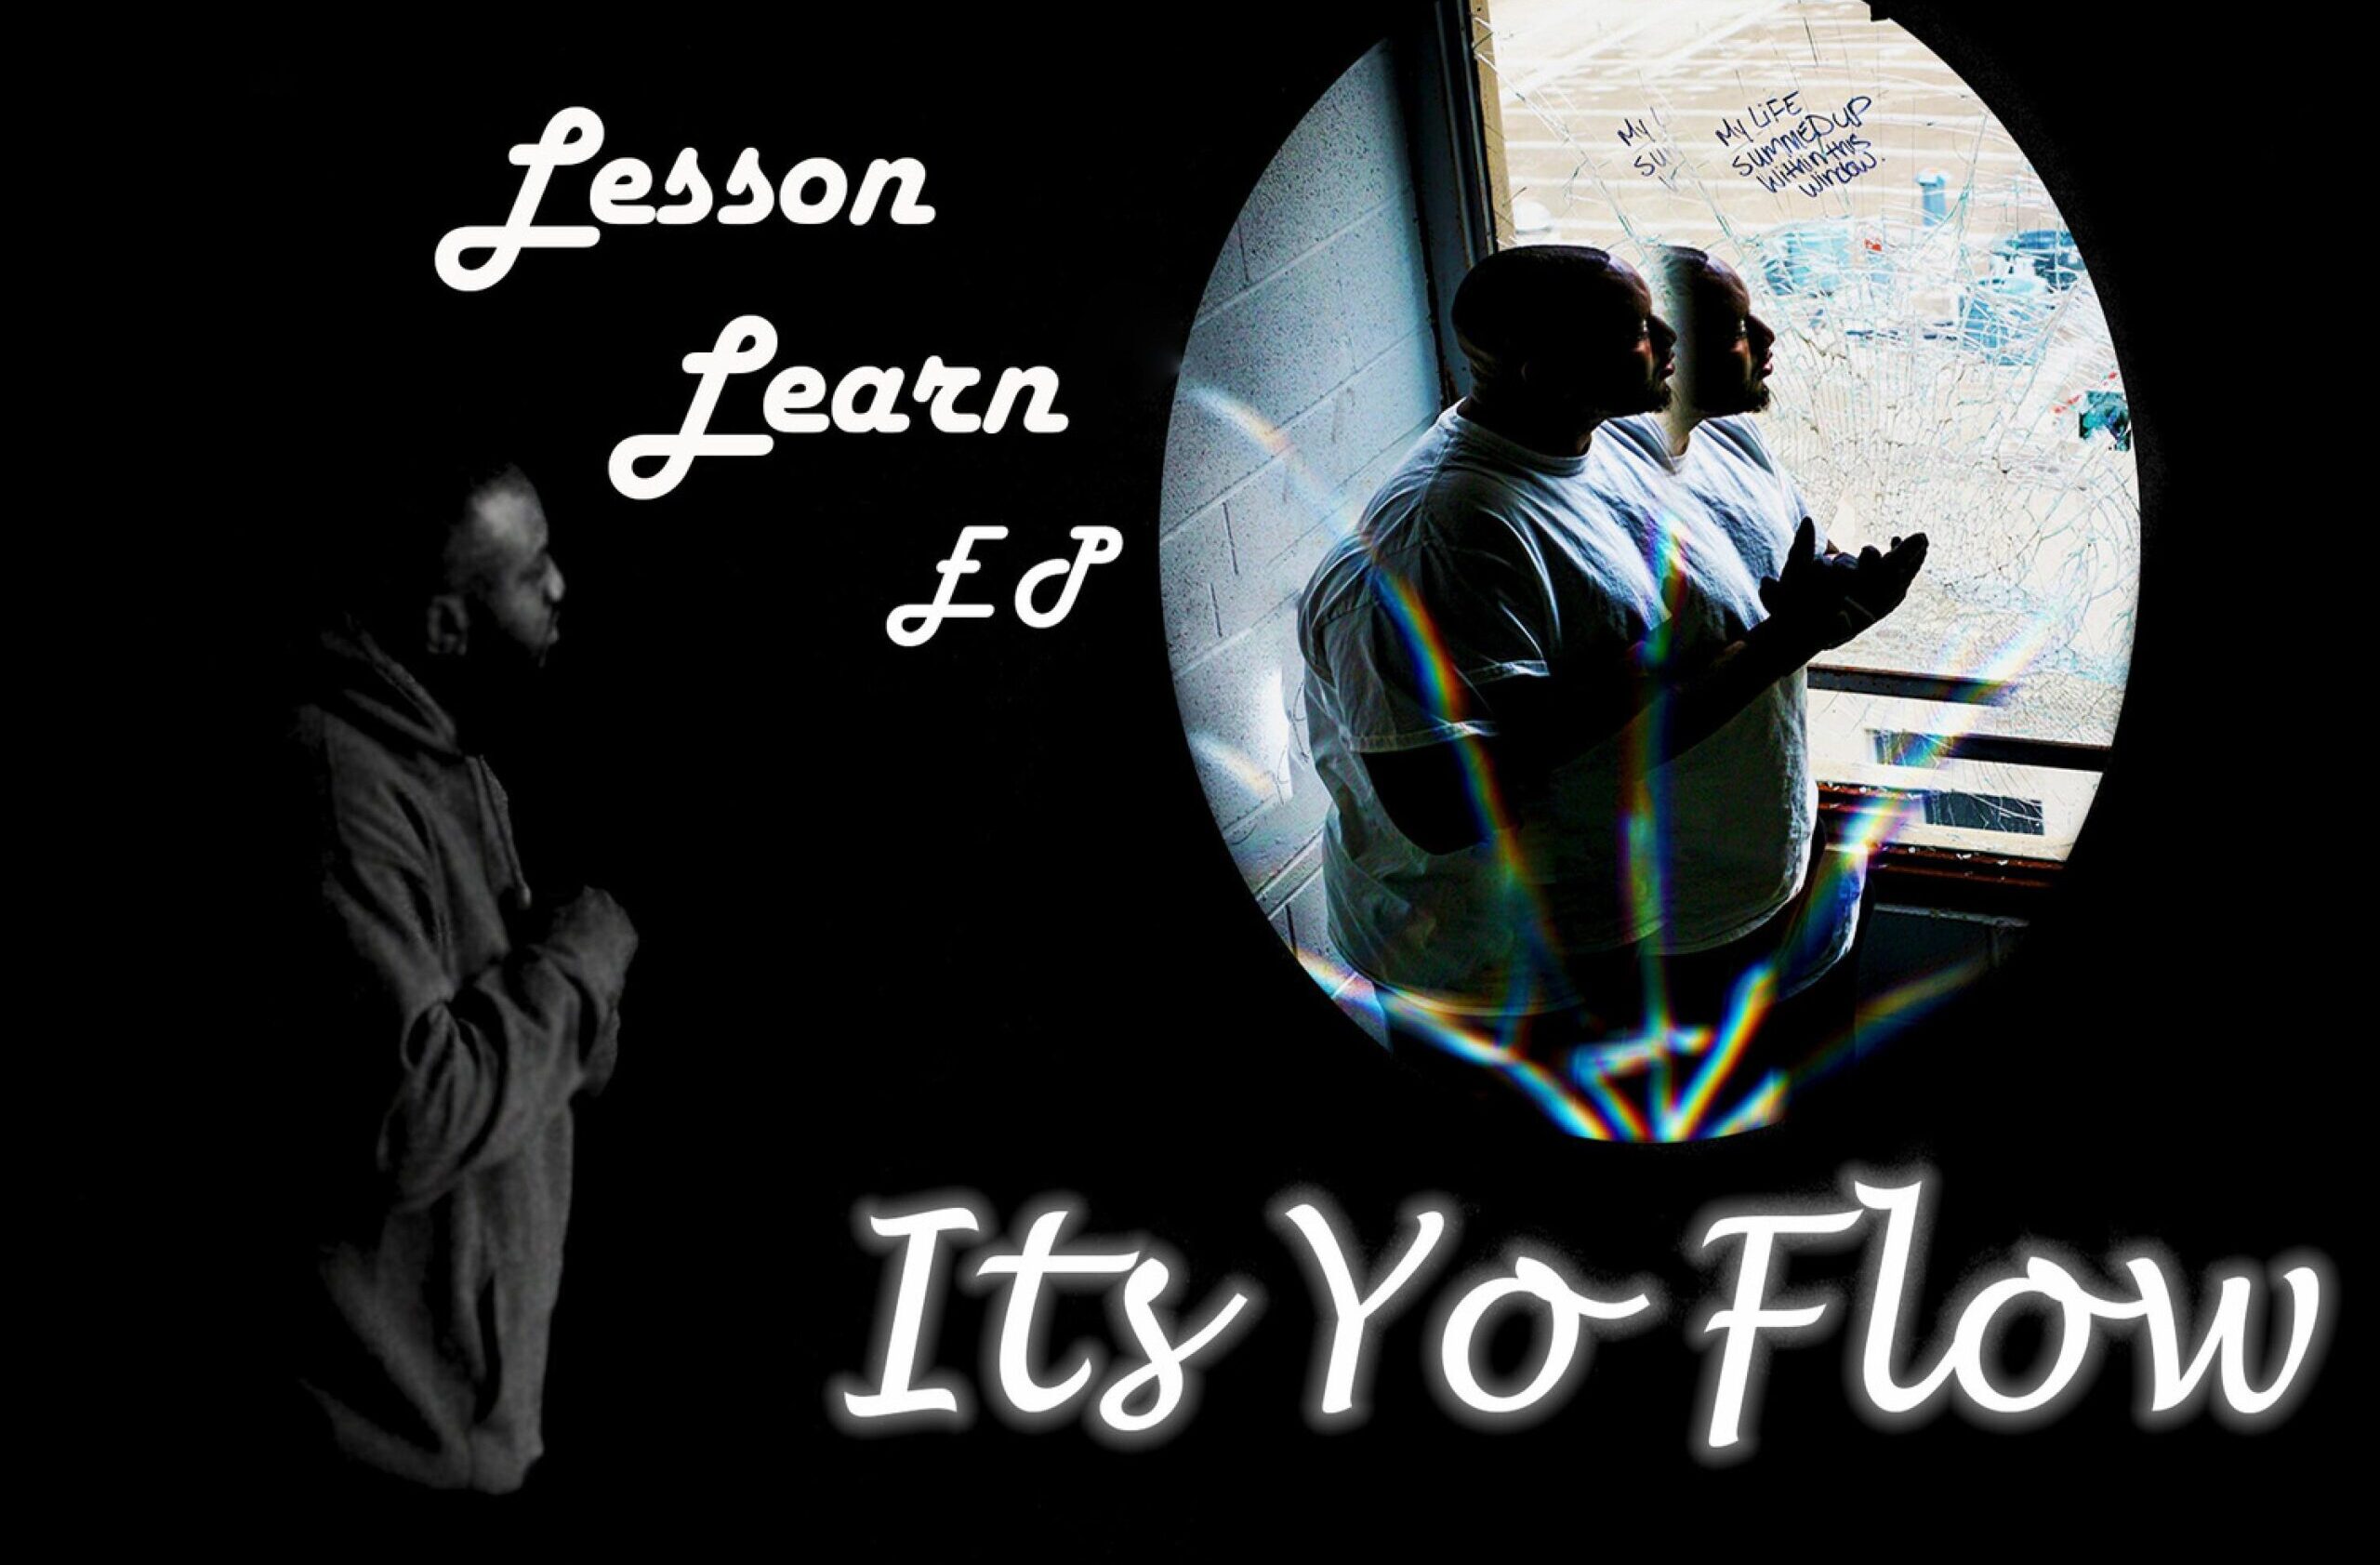 ItsYoflow's "Lesson Learn" EP Makes A Mark In Hip-Hop With Its Unique Sound And Inspiring Messages